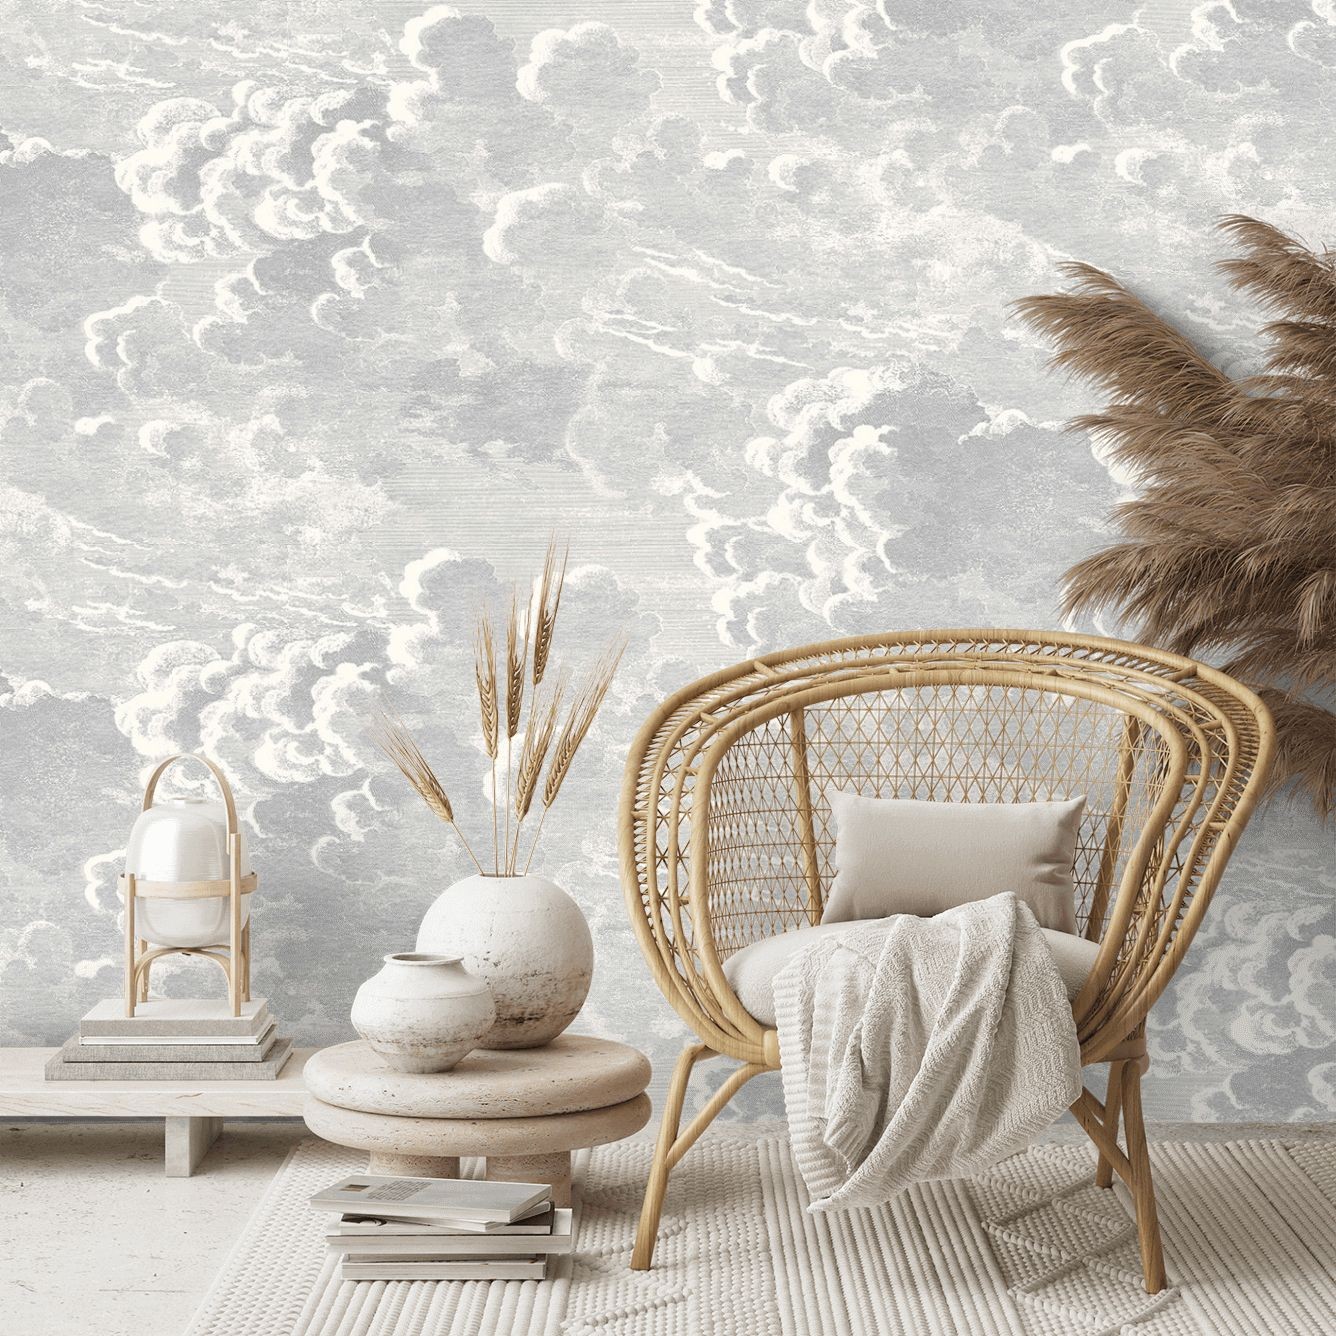 Dreamy bedroom interiors  fornasettis Nuvolette cloud wallpaper helps  create peace and tranquillity in the guest bedroom we designed for   Instagram